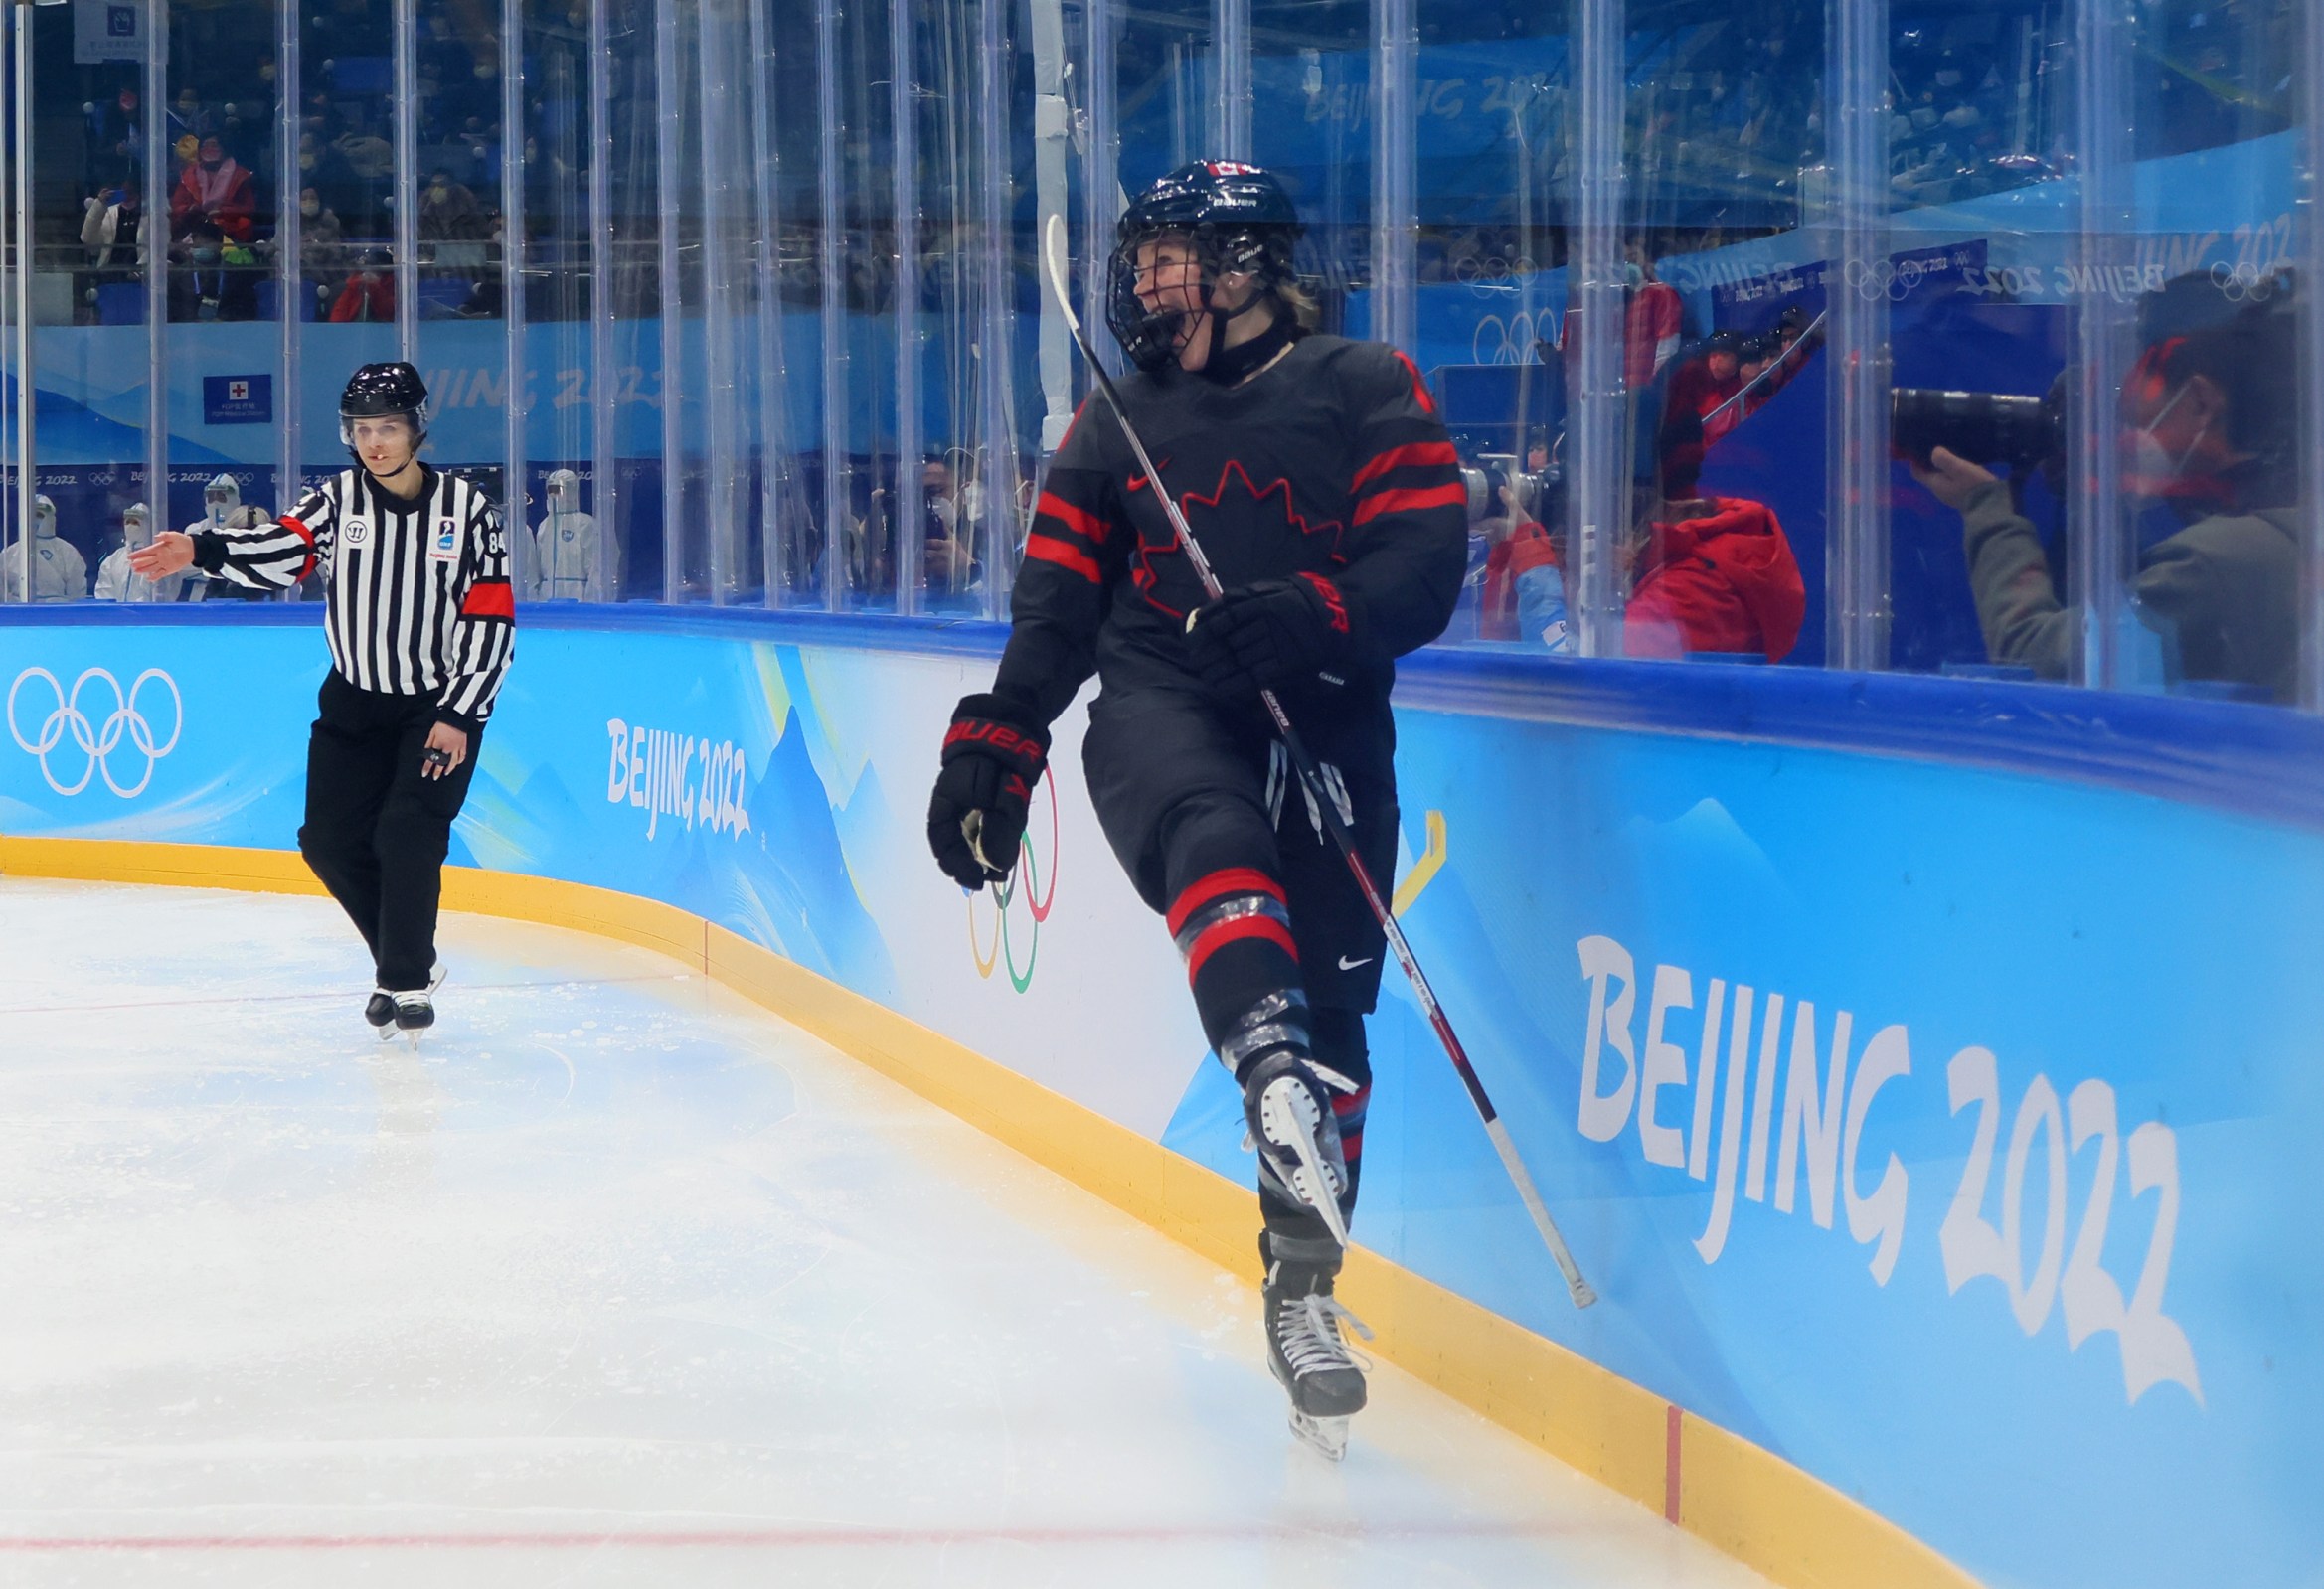 BEIJING, CHINA - FEBRUARY 03: Sarah Fillier #10 of Team Canada reacts after scoring a goal during the Women's Ice Hockey Preliminary Round Group A match between Team Canada and Team Switzerland at National Indoor Stadium on February 03, 2022 in Beijing, China.